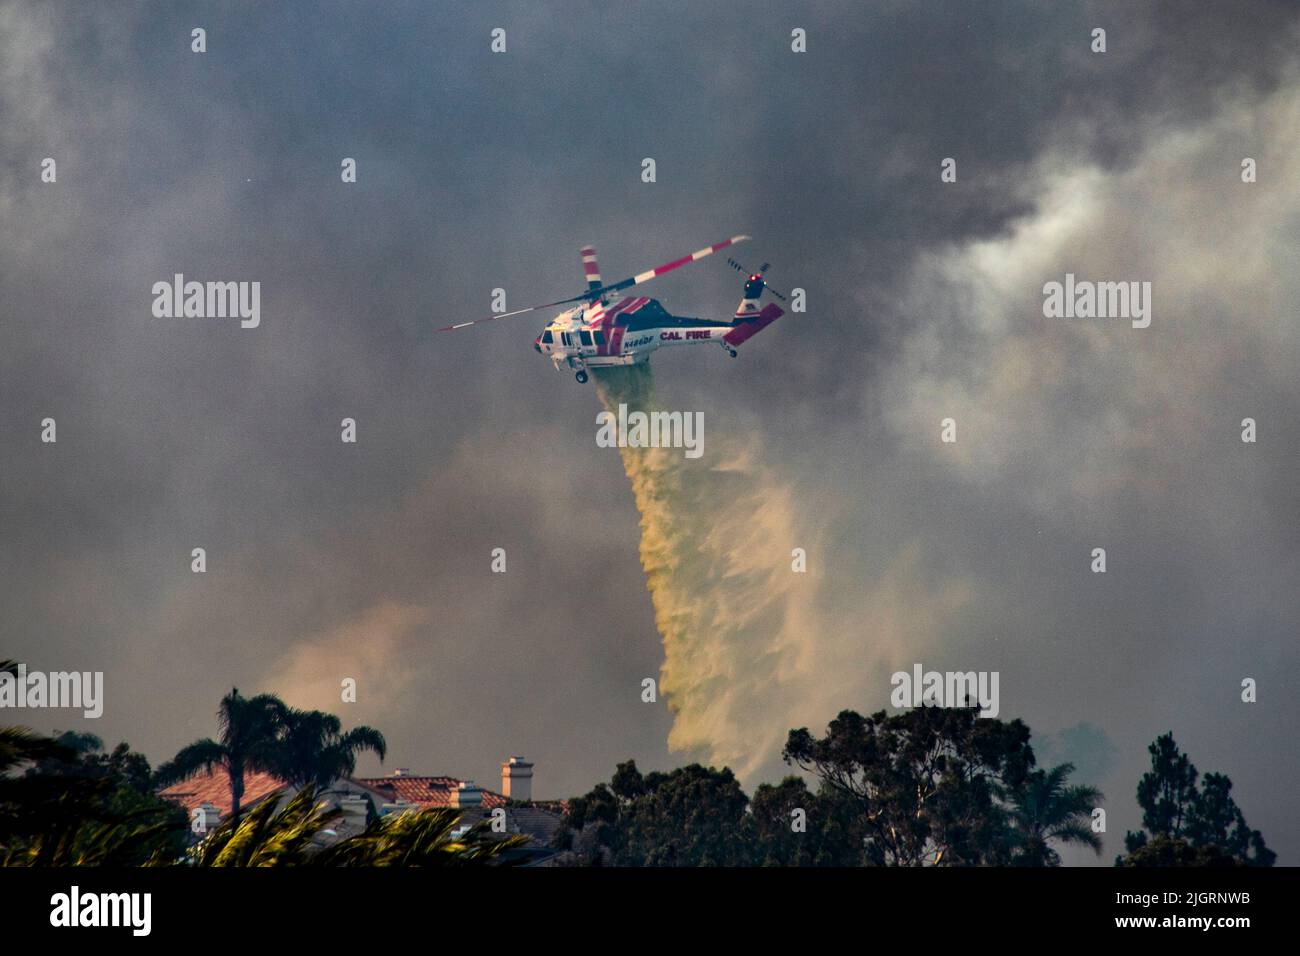 A fire department helicopter drops fire retardant on a burning suburban home in Laguna Niguel, CA. Stock Photo